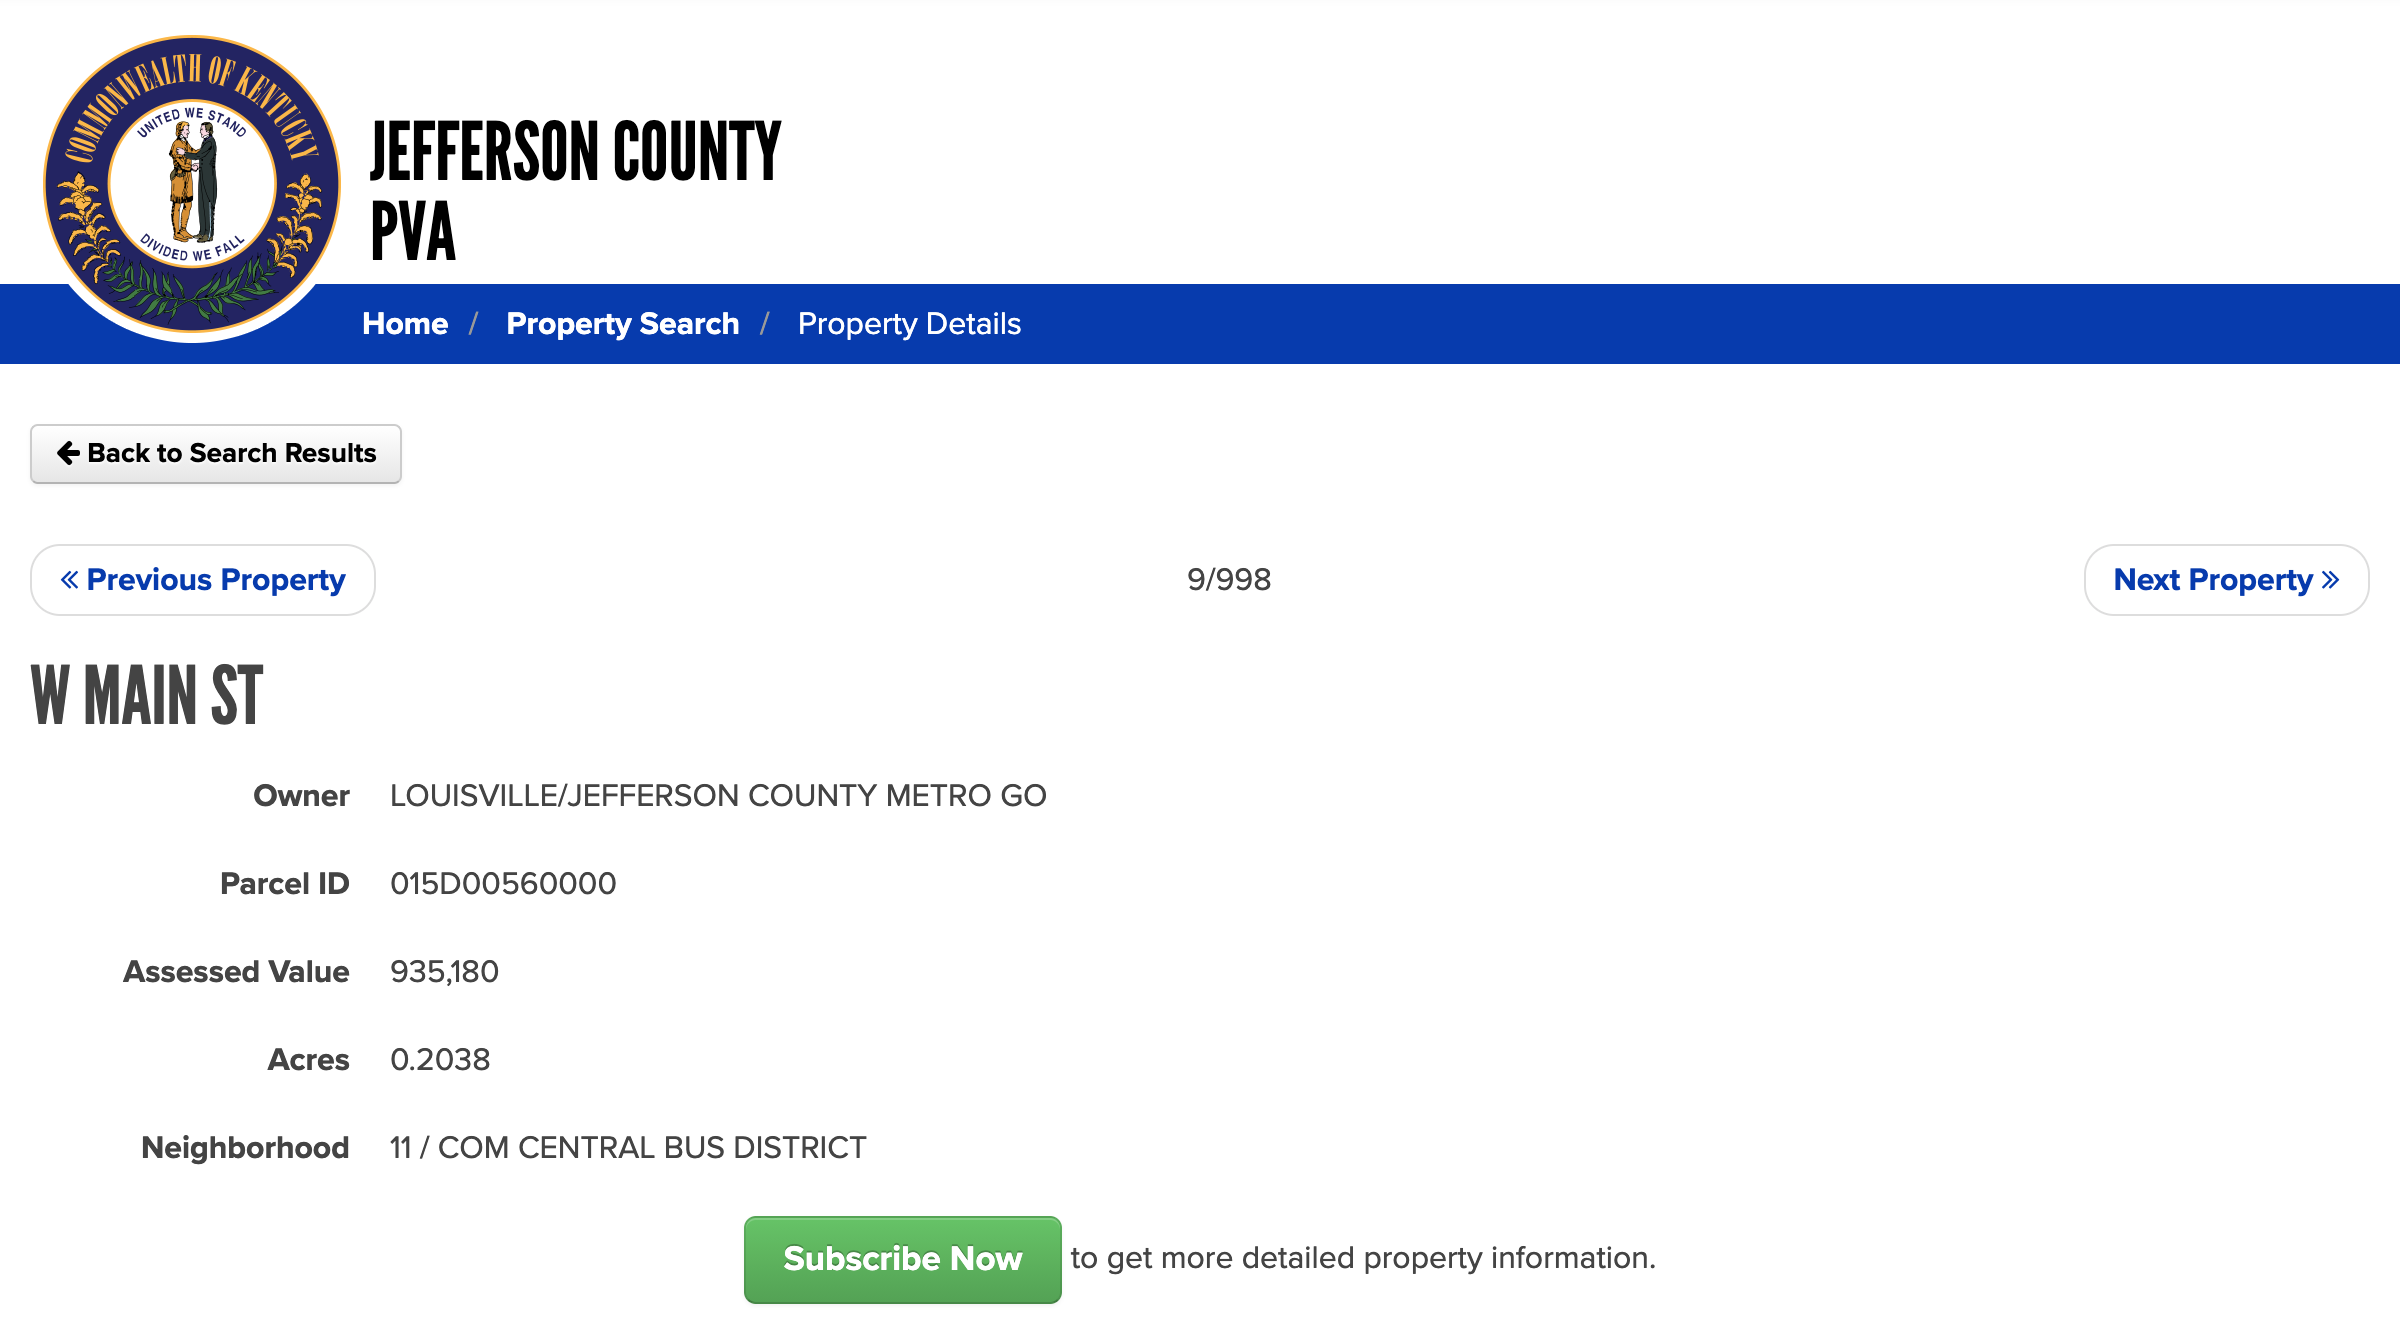 Jeffferson PVA requires paid subscription to view public property records online